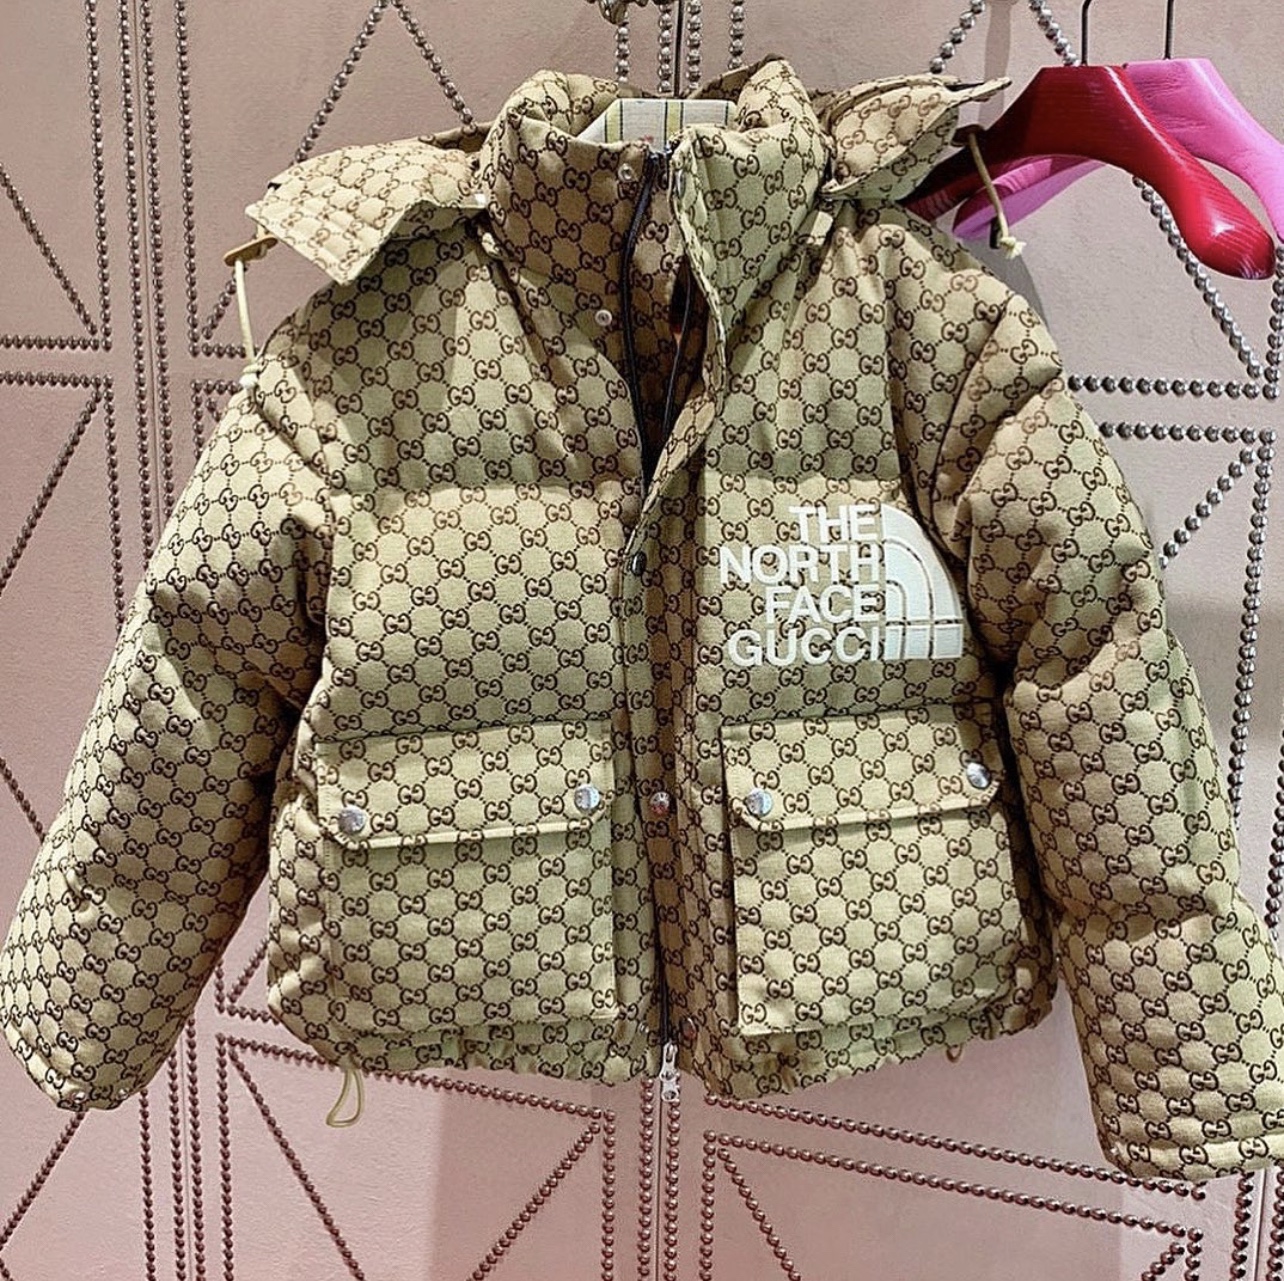 The North Face x Gucci Collection is Going to Take Over Street Style